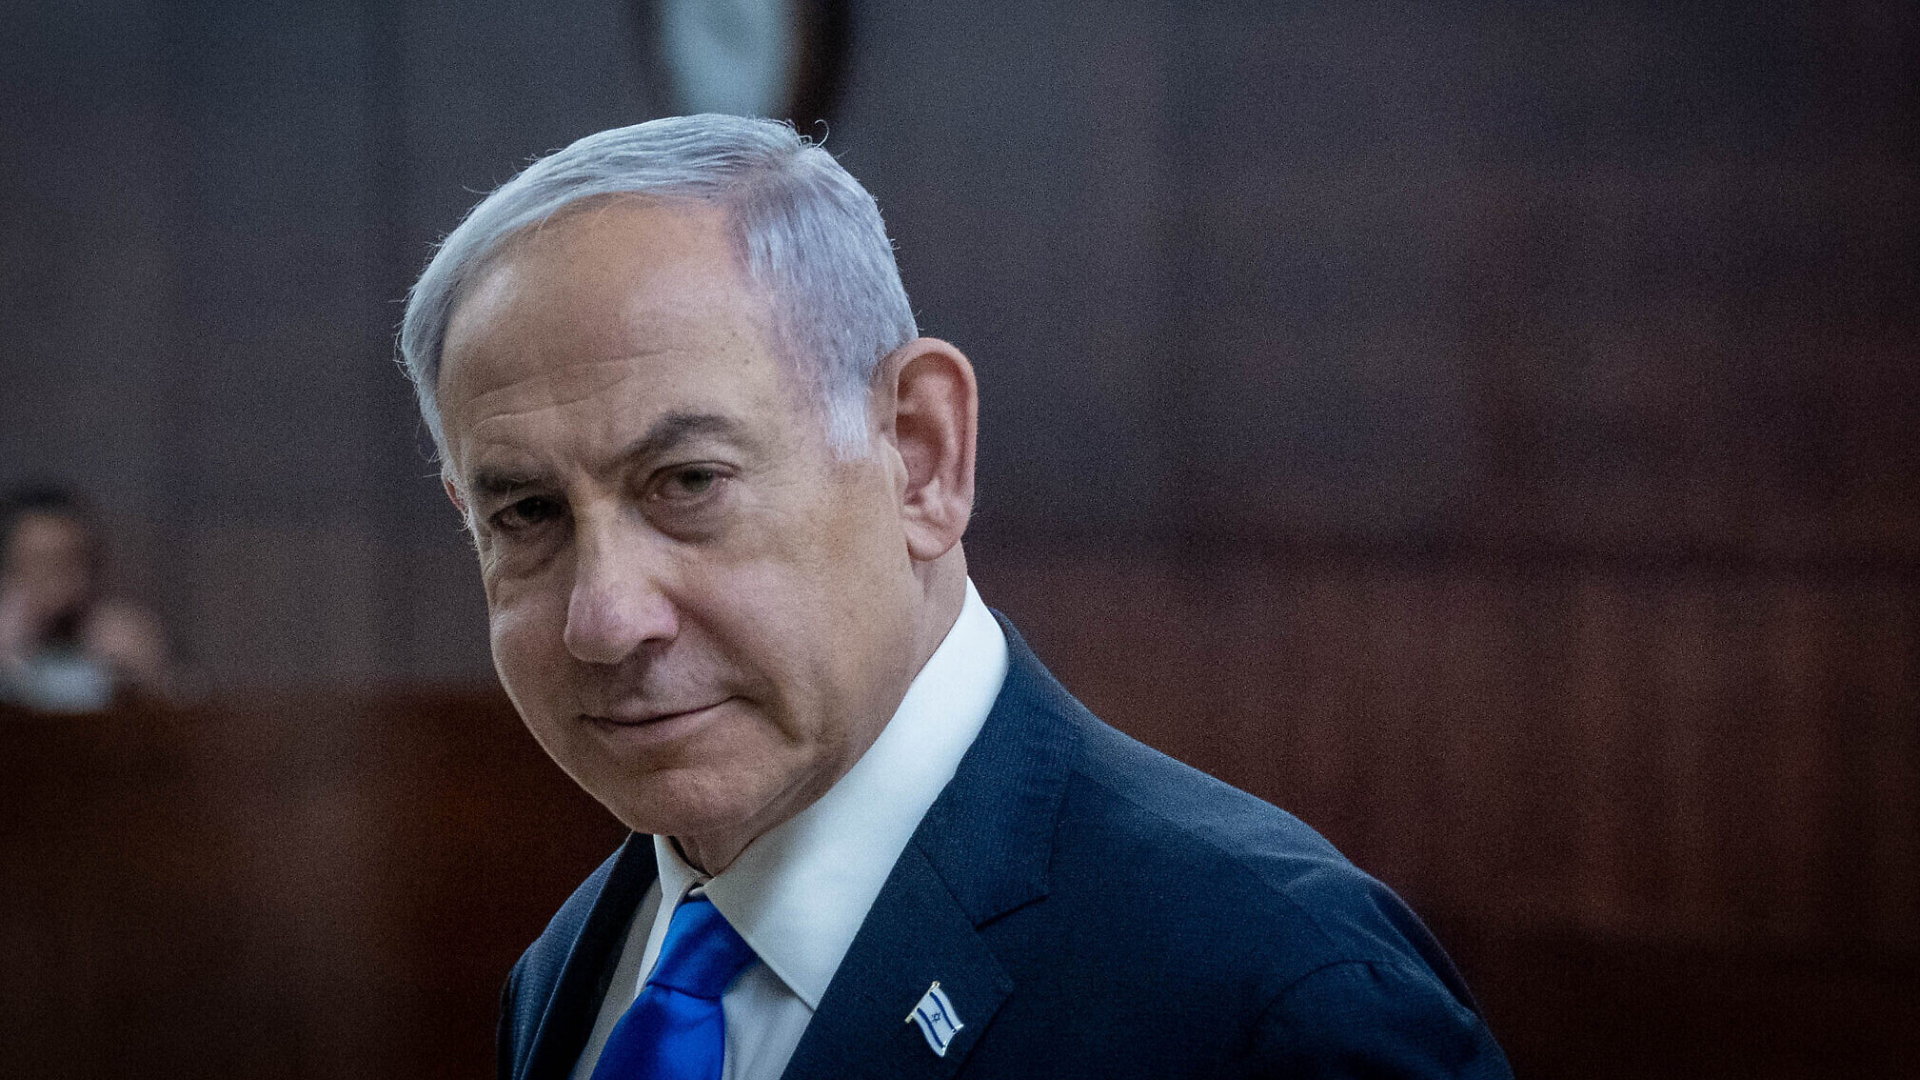 Netanyahu Envisions Post-War Gaza As Demilitarized And De-Radicalized With Palestinian Civilian Leadership